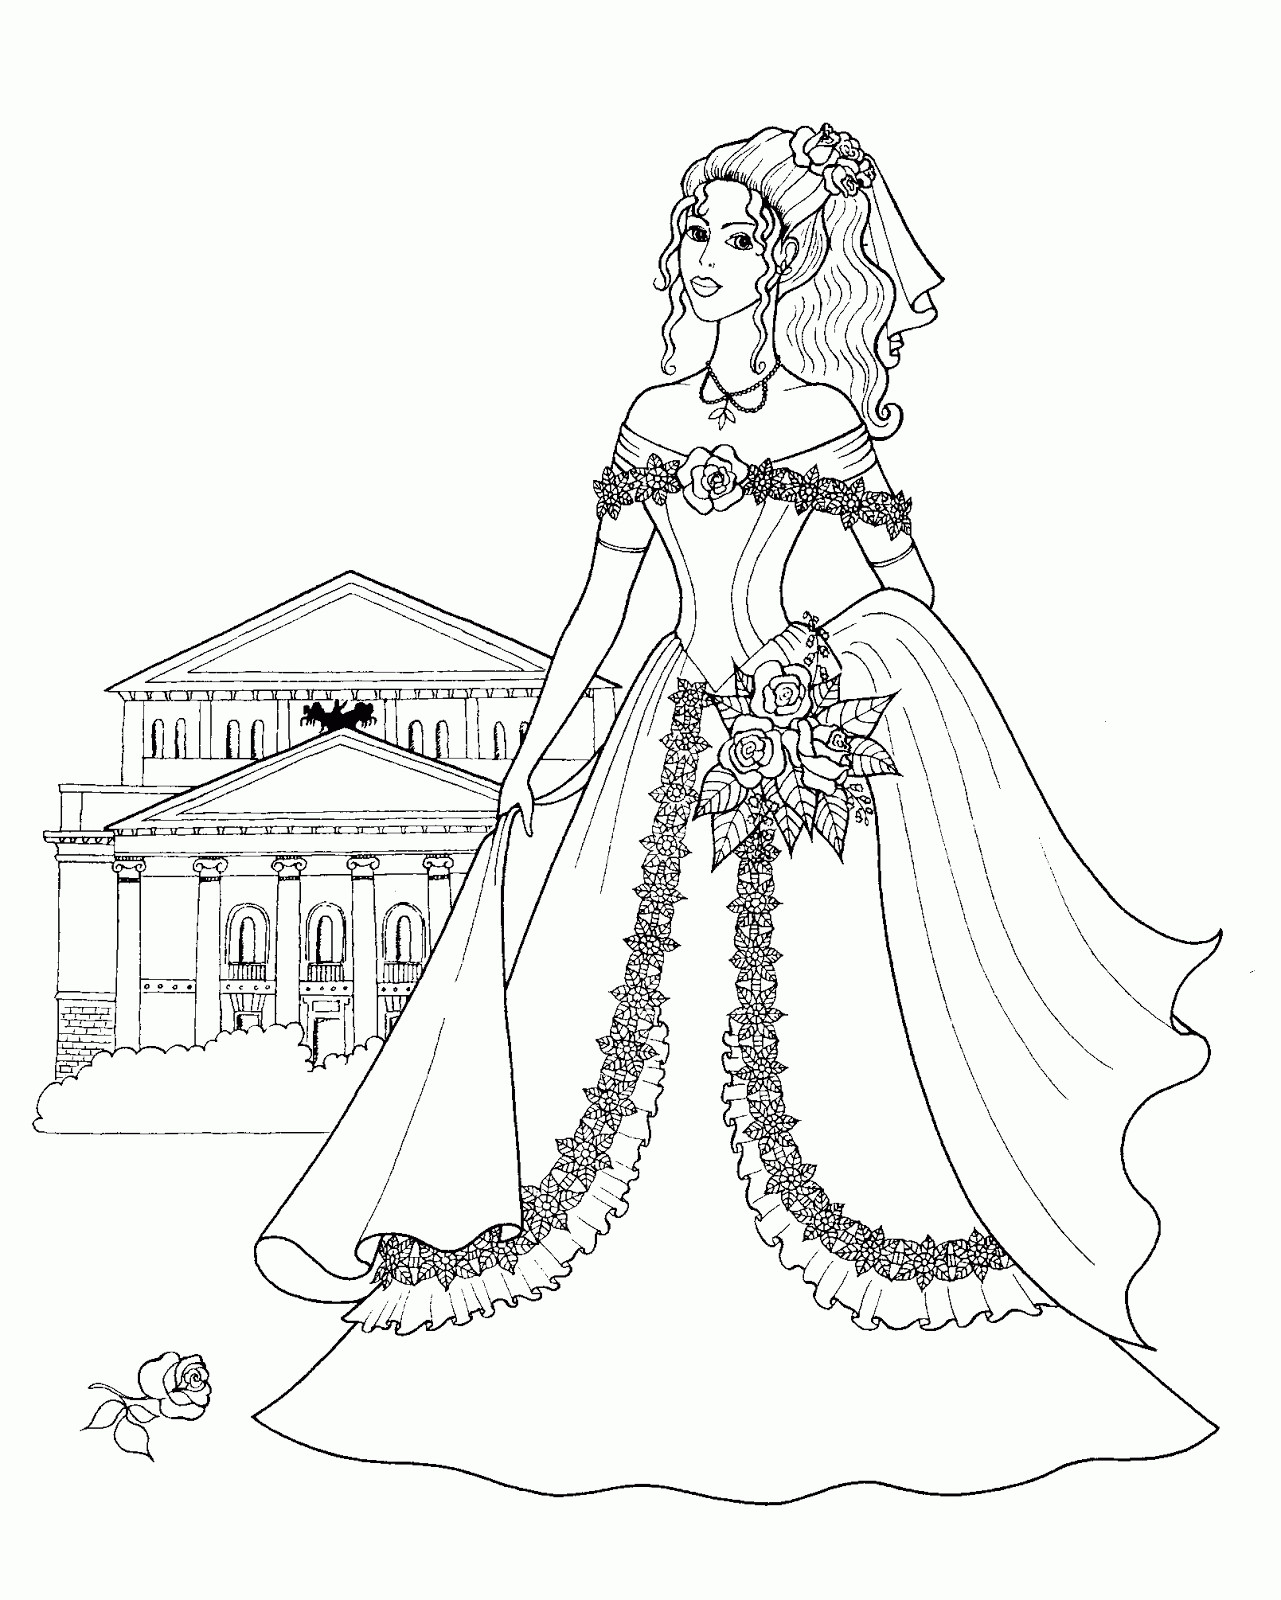 Coloring Pages For Women
 Coloring Pages Fashionable Girls free printable coloring